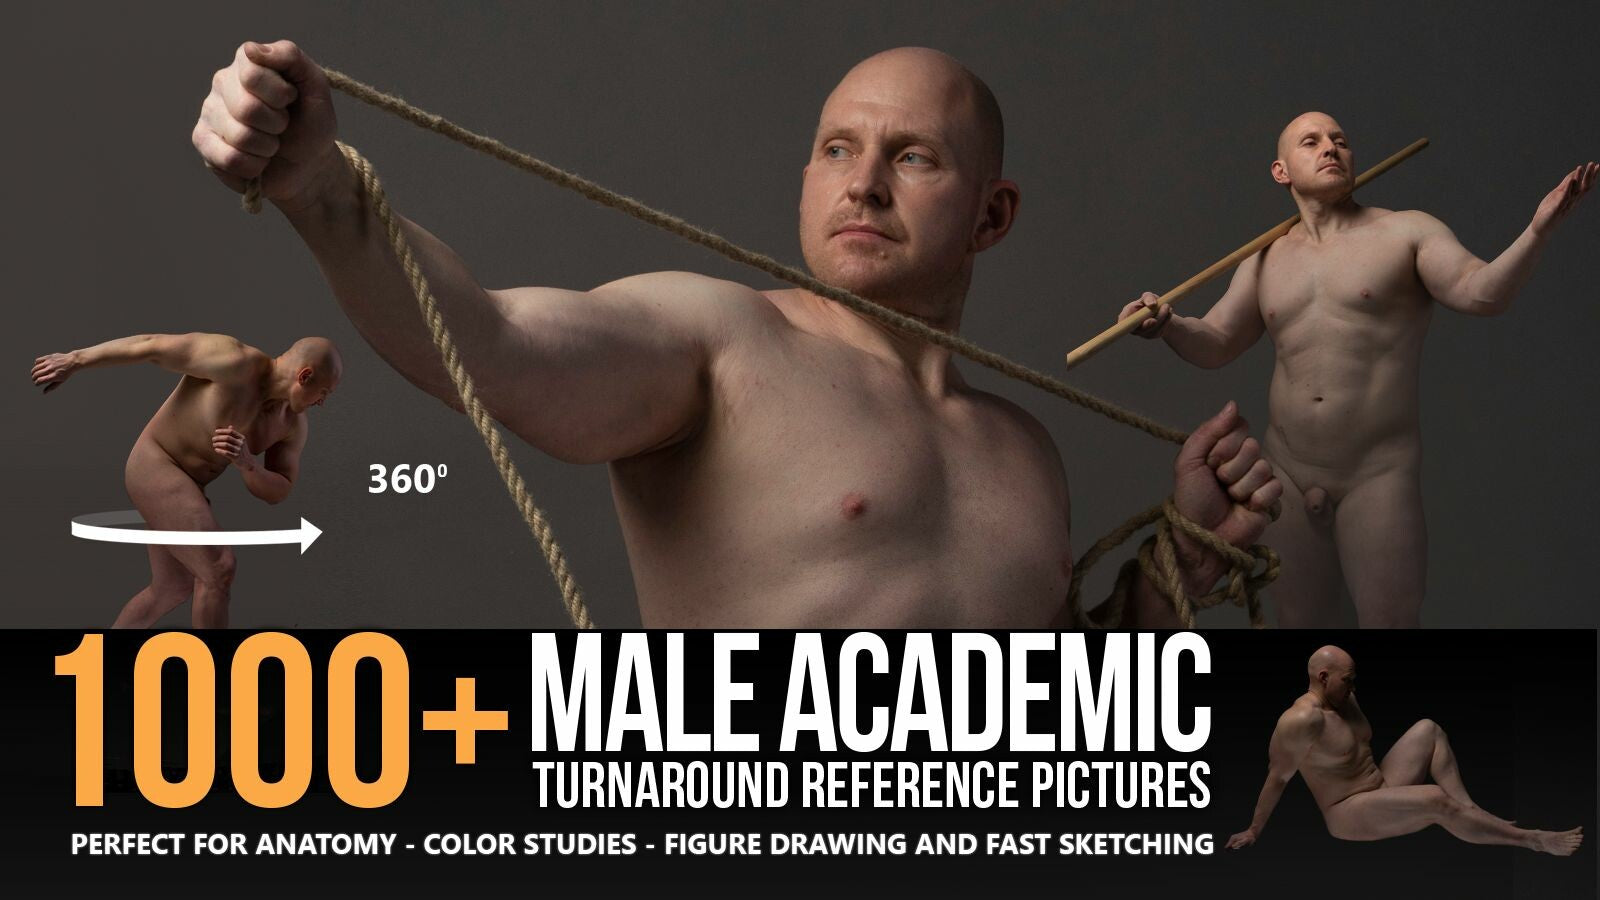 1000+ Male Academic Turnaround Reference Pictures